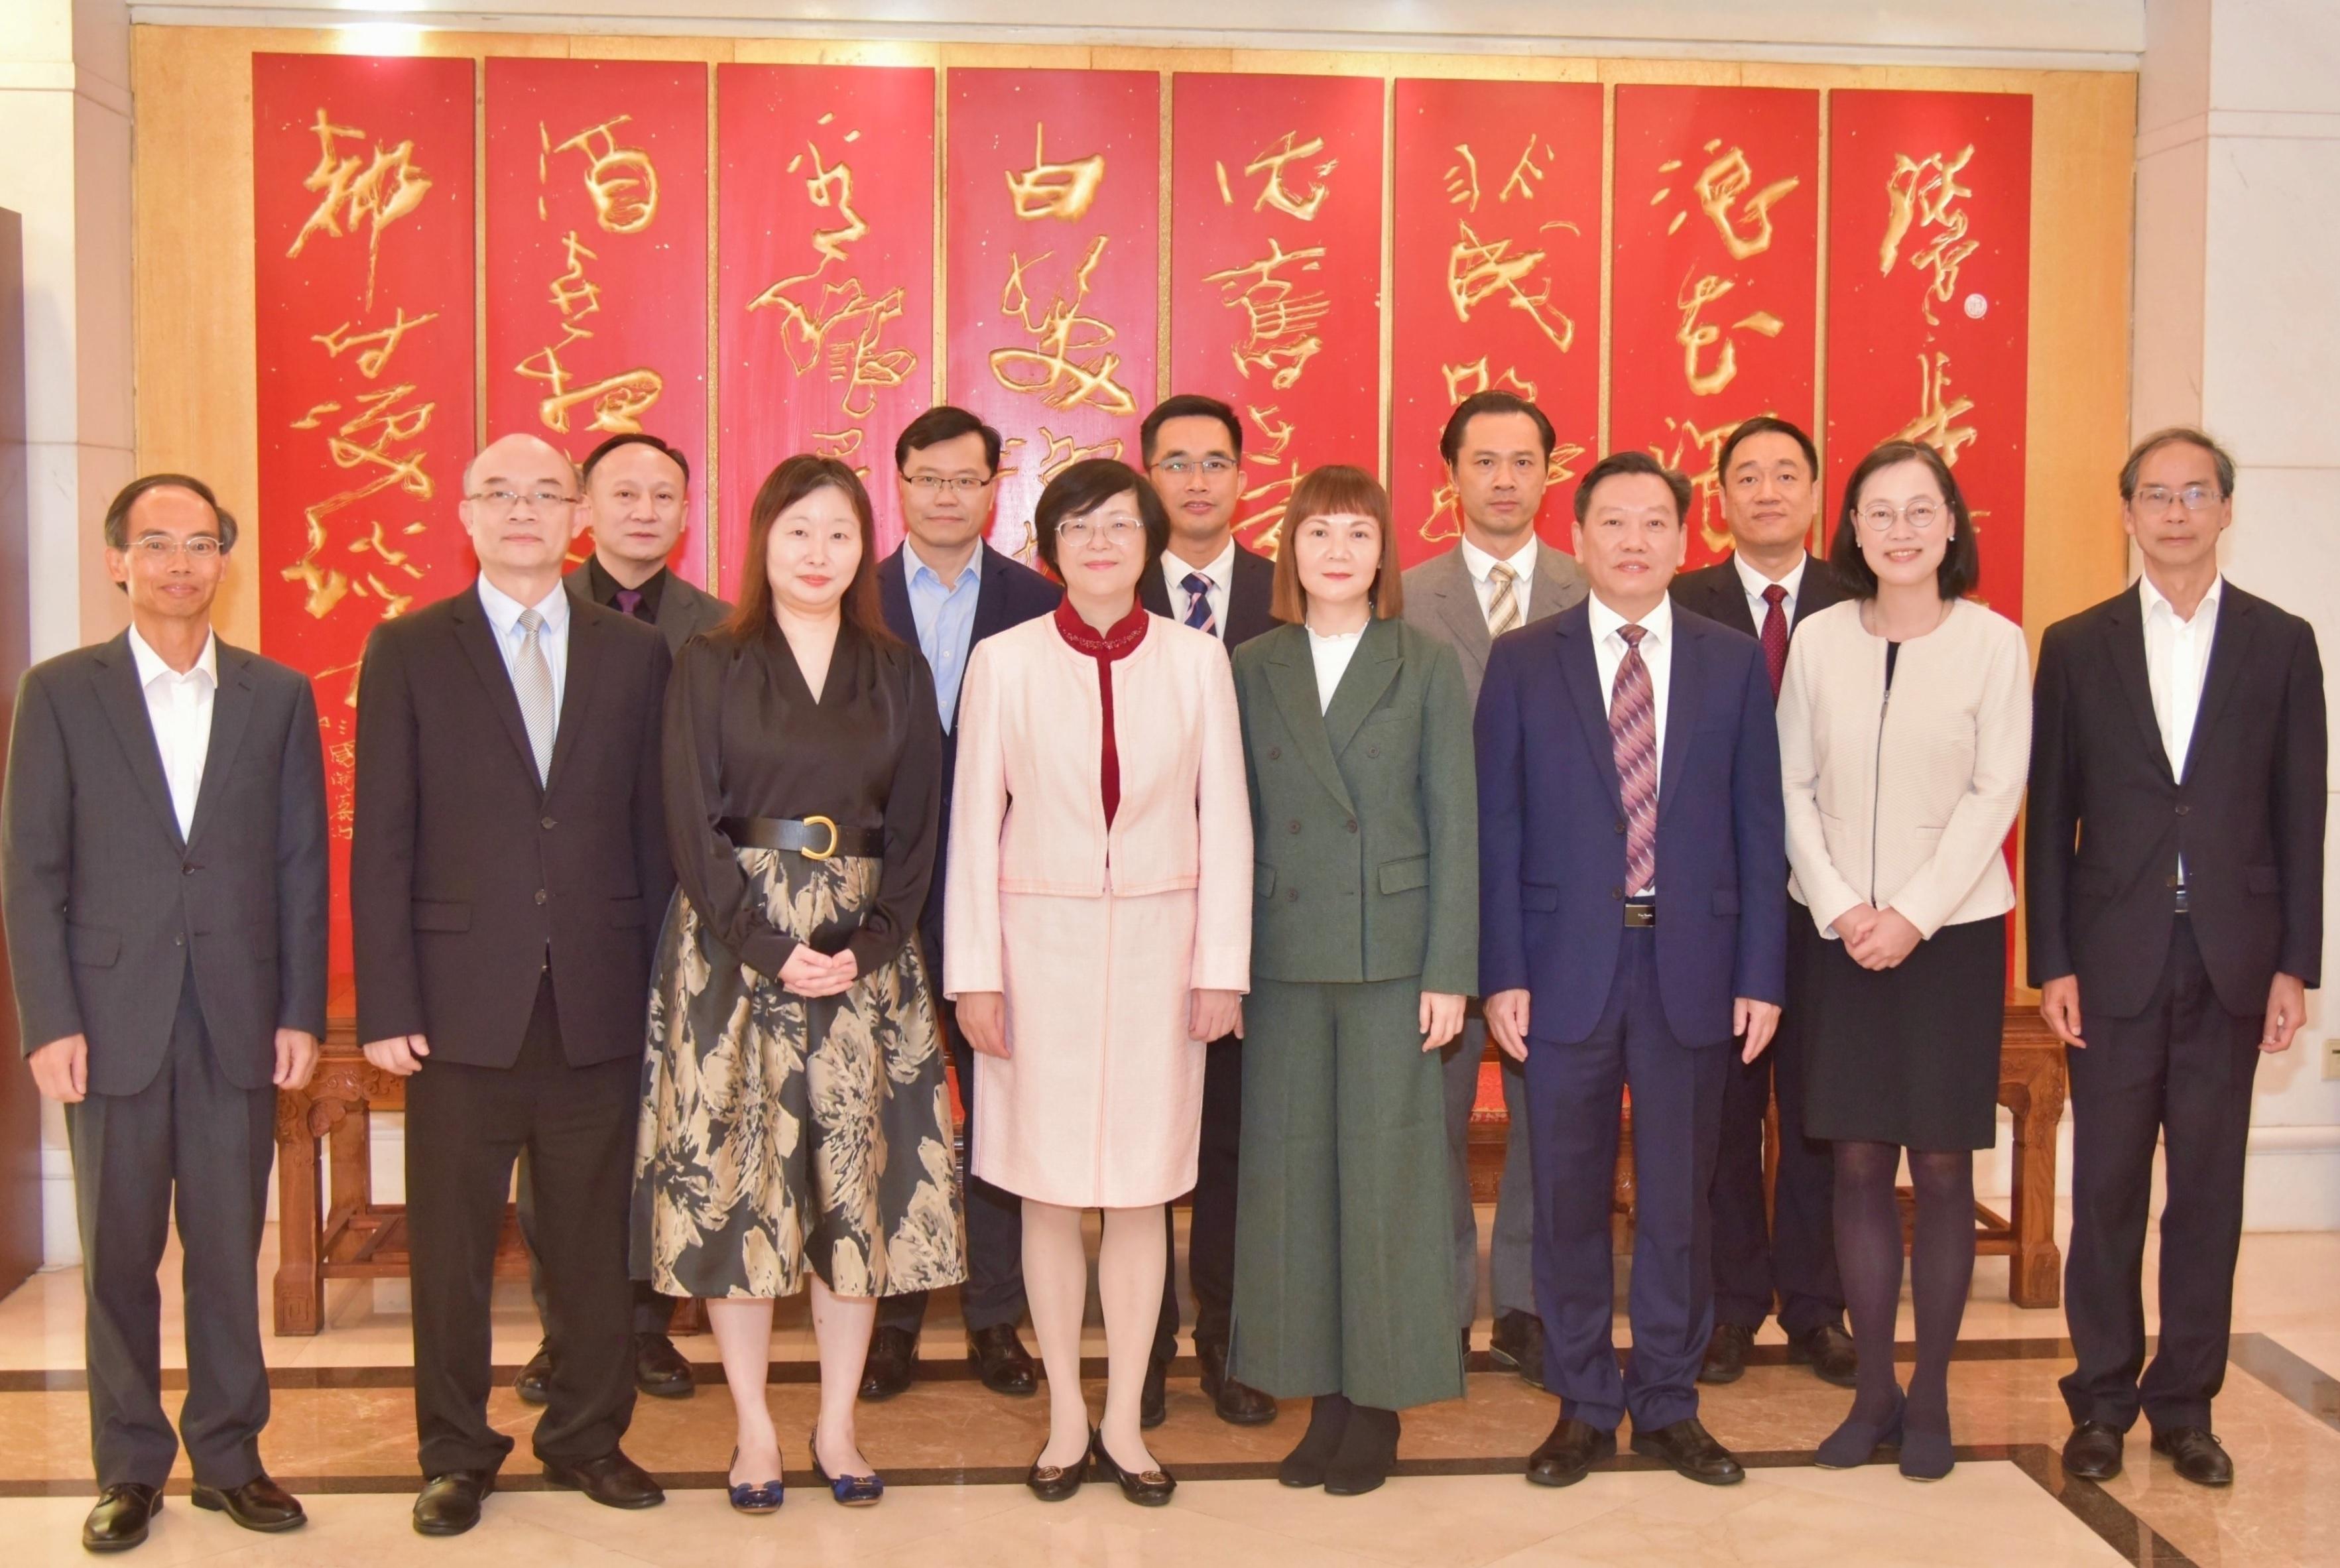 The Commissioner for the Development of the Guangdong-Hong Kong-Macao Greater Bay Area, Ms Maisie Chan, visited Guangzhou today (February 22). Photo shows Ms Chan (front row, fourth right); the Director of the Hong Kong and Macao Affairs Office of Guangdong Province, Ms Chen Li-wen (front row, fourth left); the Director of the Hong Kong Economic and Trade Office in Guangdong, Miss Linda So (front row, third left), and relevant personnel.